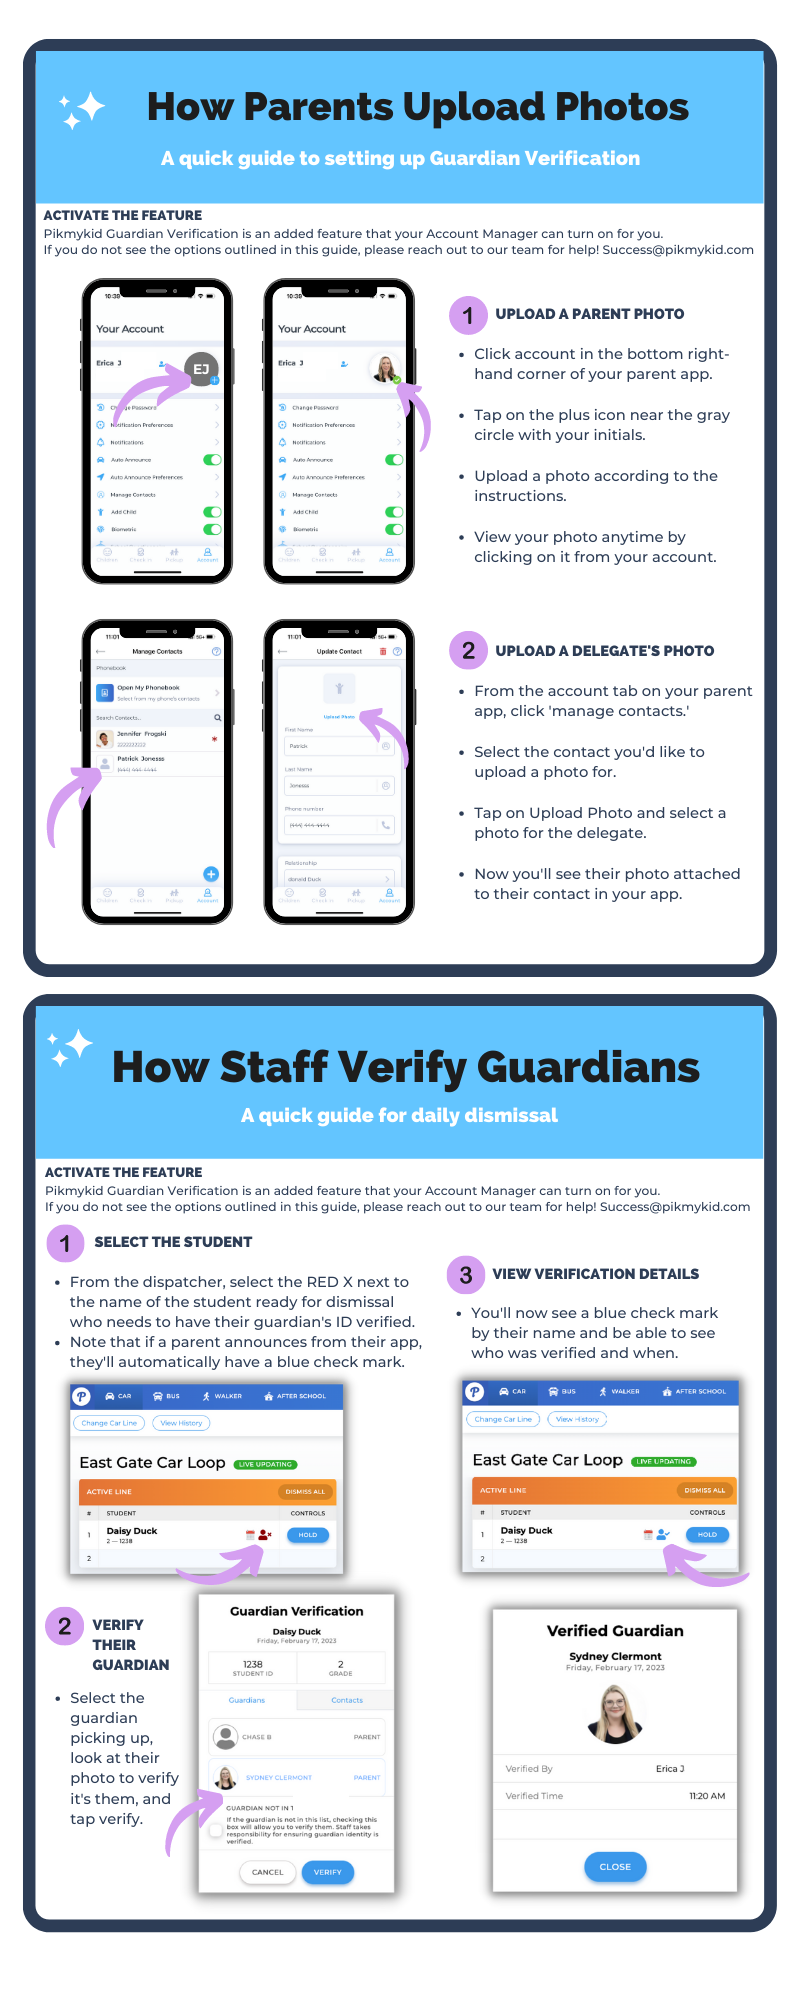 Guardian verification instructions for parents and staff